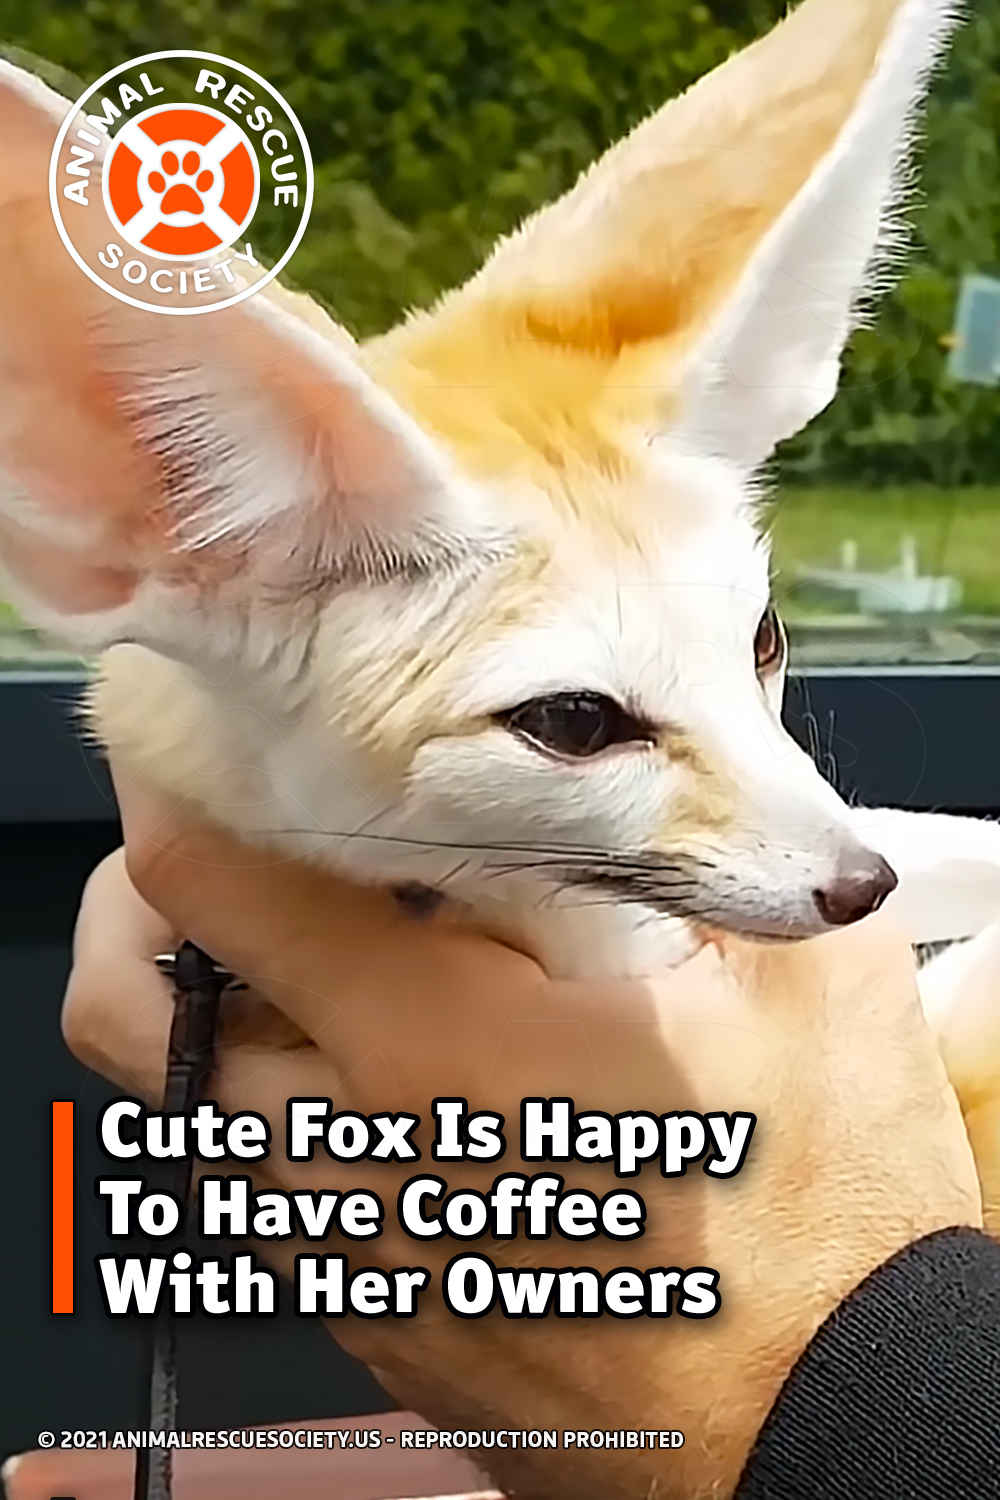 Cute Fox Is Happy To Have Coffee With Her Owners